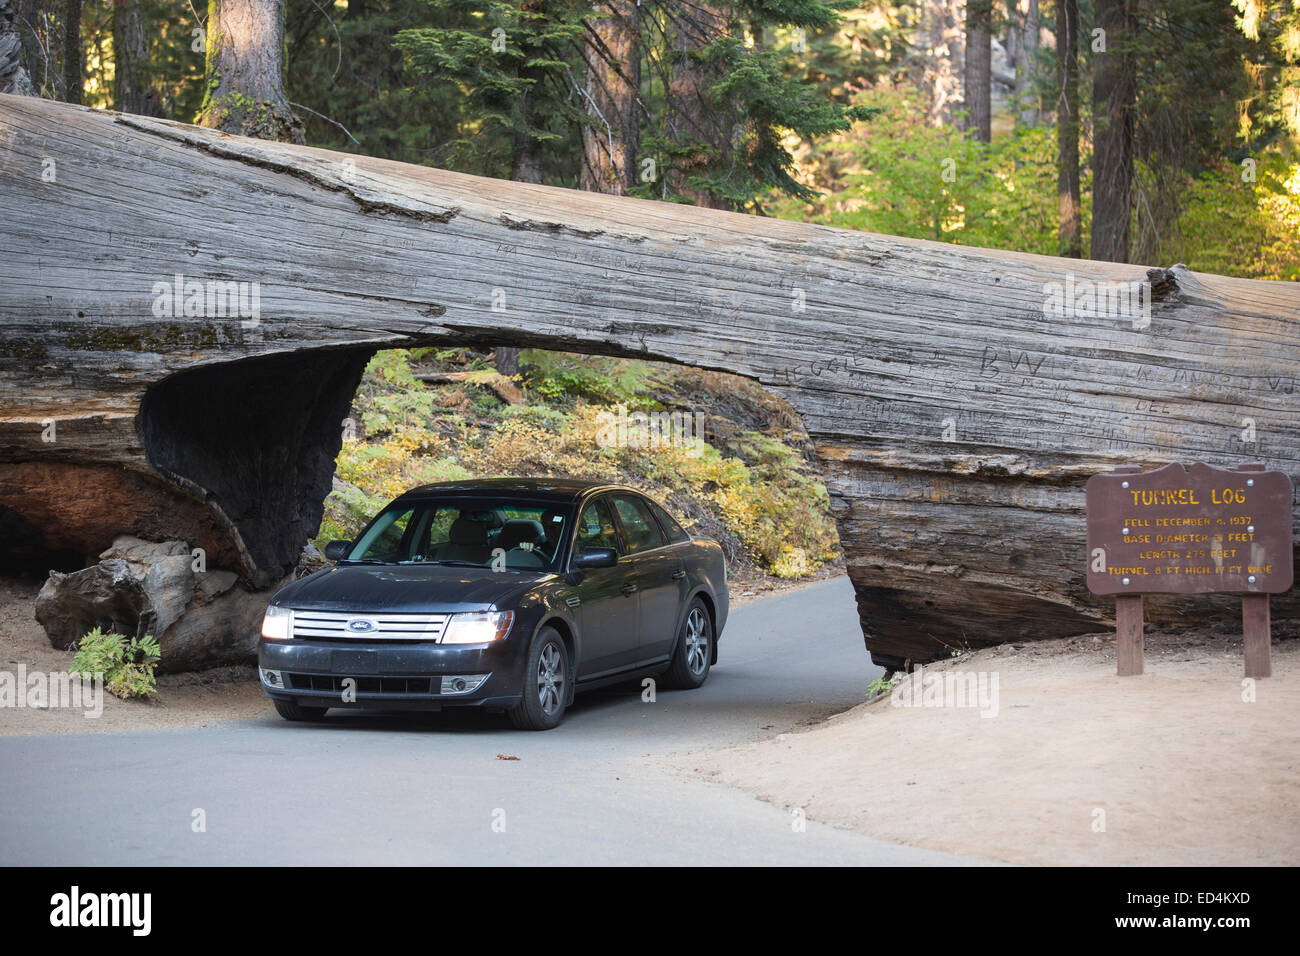 The Tunnel Log a fallen Giant Redwood, or Sequoia, Sequoiadendron giganteum, in Sequoia National Park, California, USA. Stock Photo